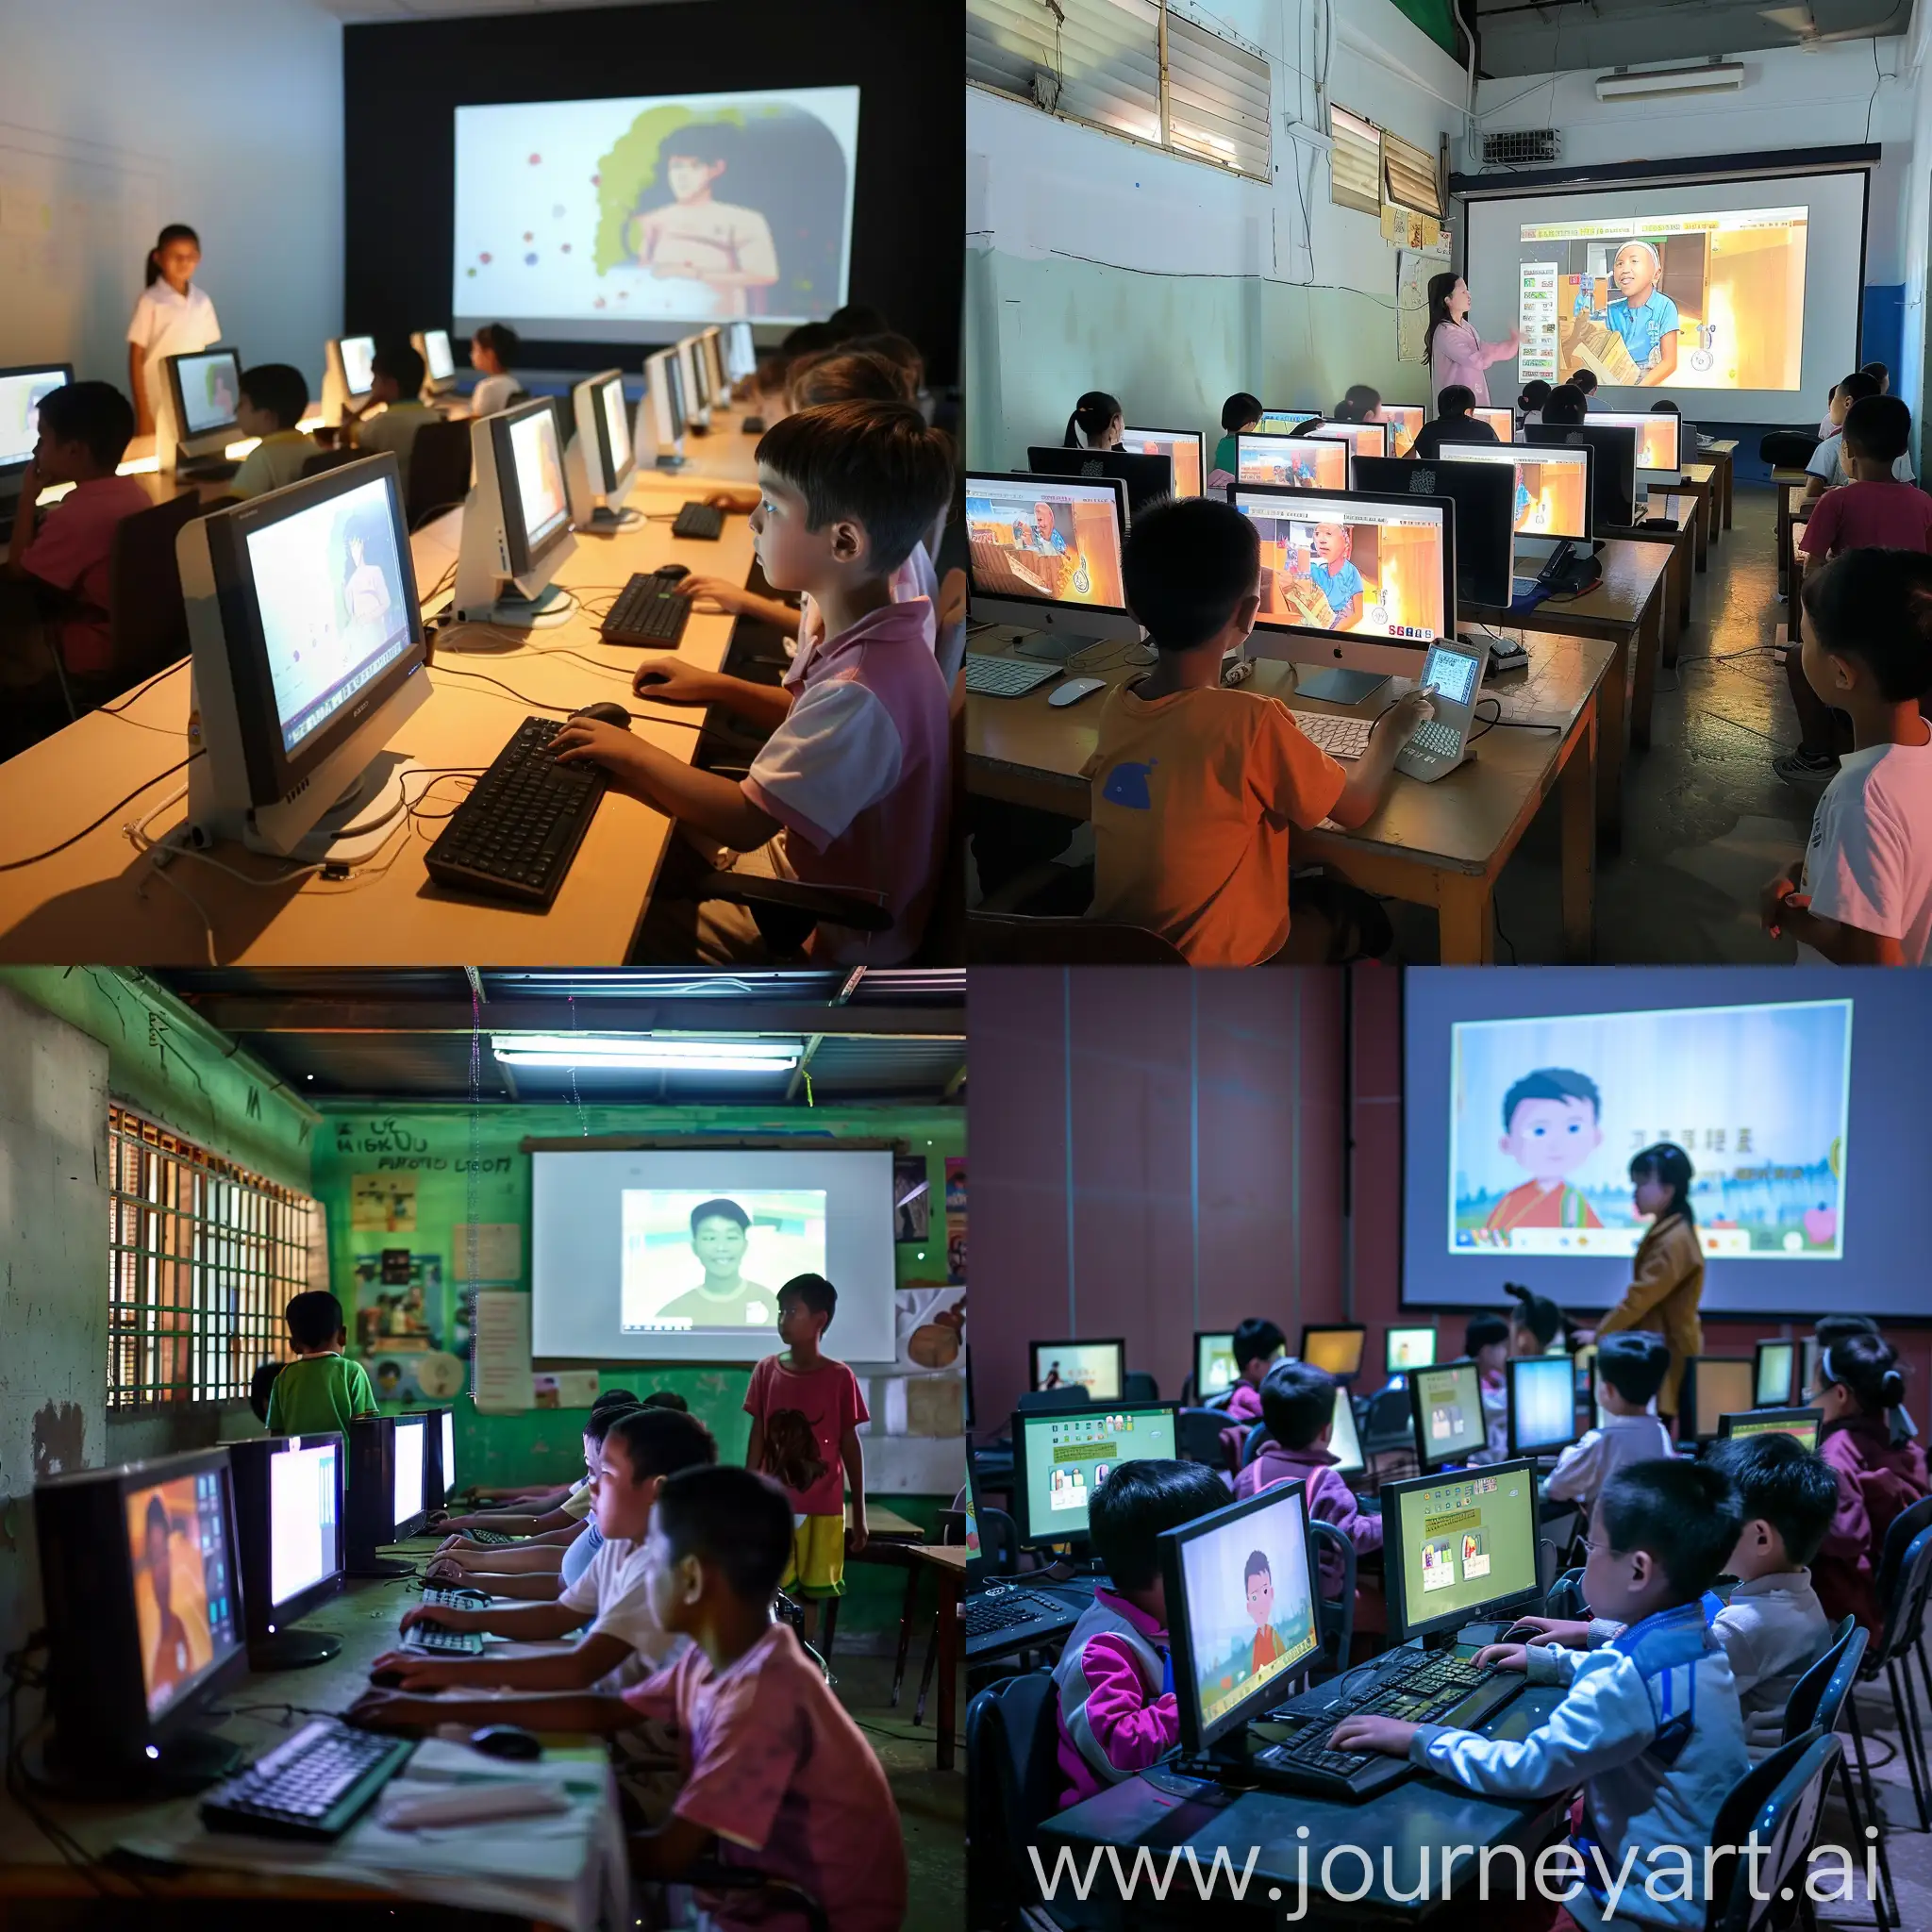 childrens are doing homework in computer lab where teacher is teaching using projector